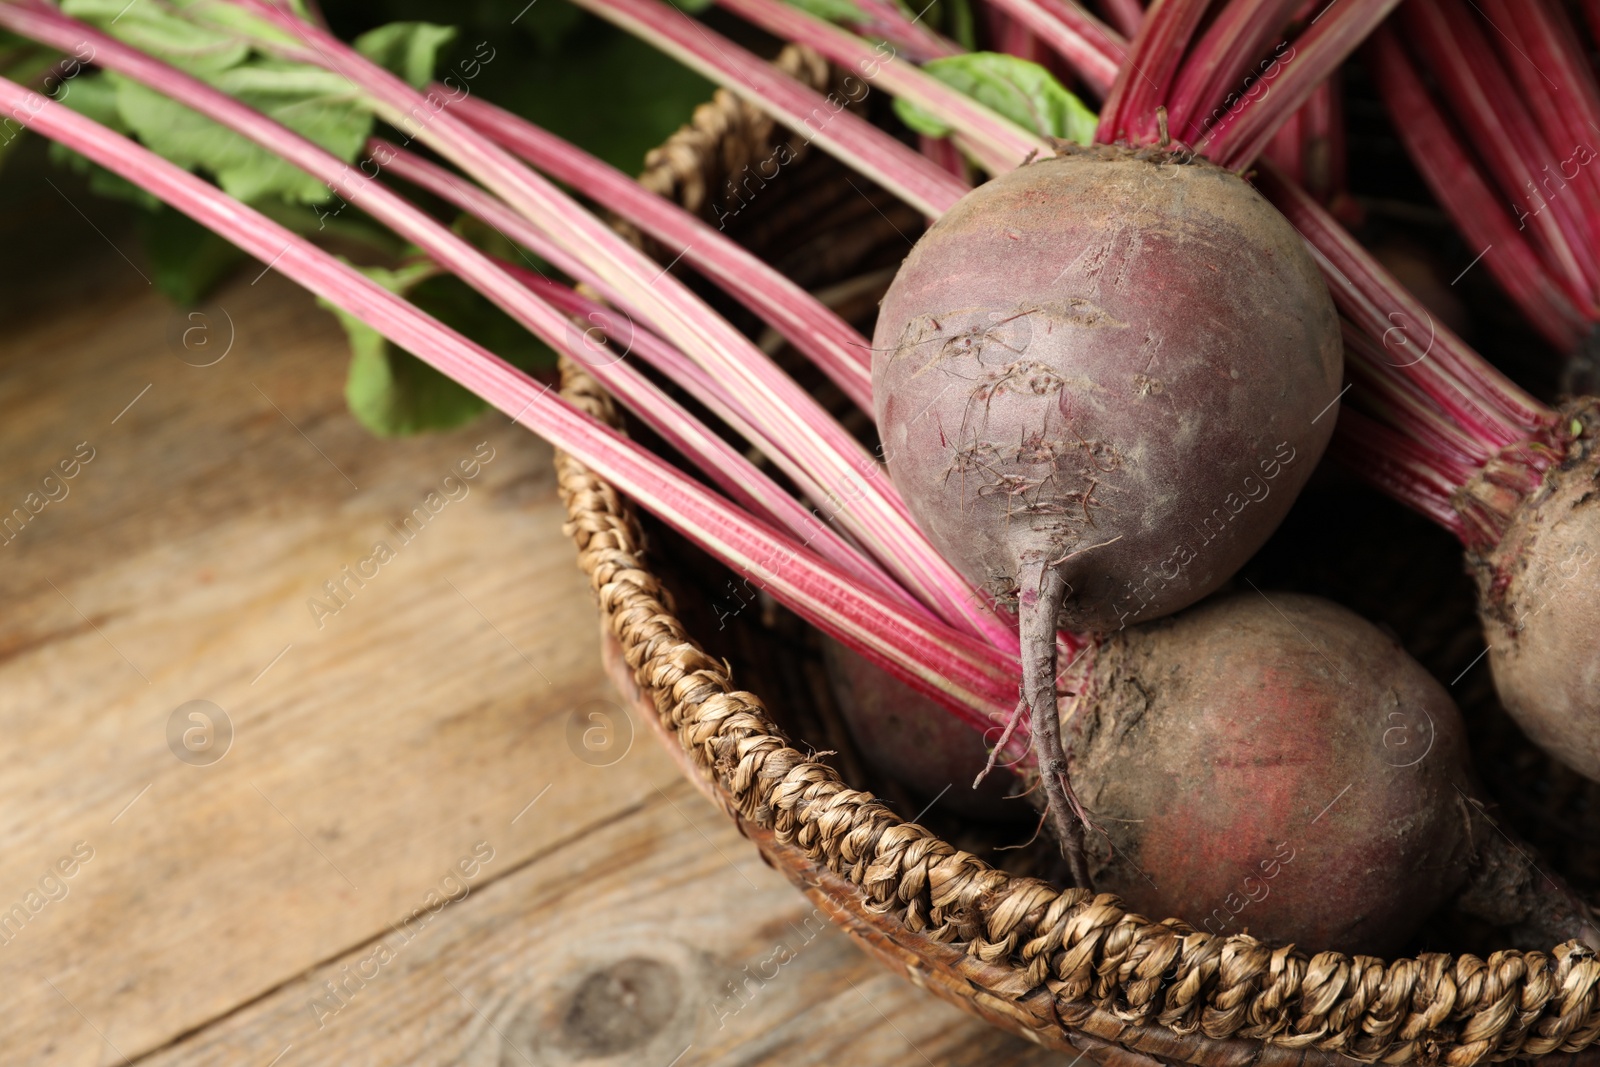 Photo of Raw ripe beets in wicker bowl on wooden table, closeup